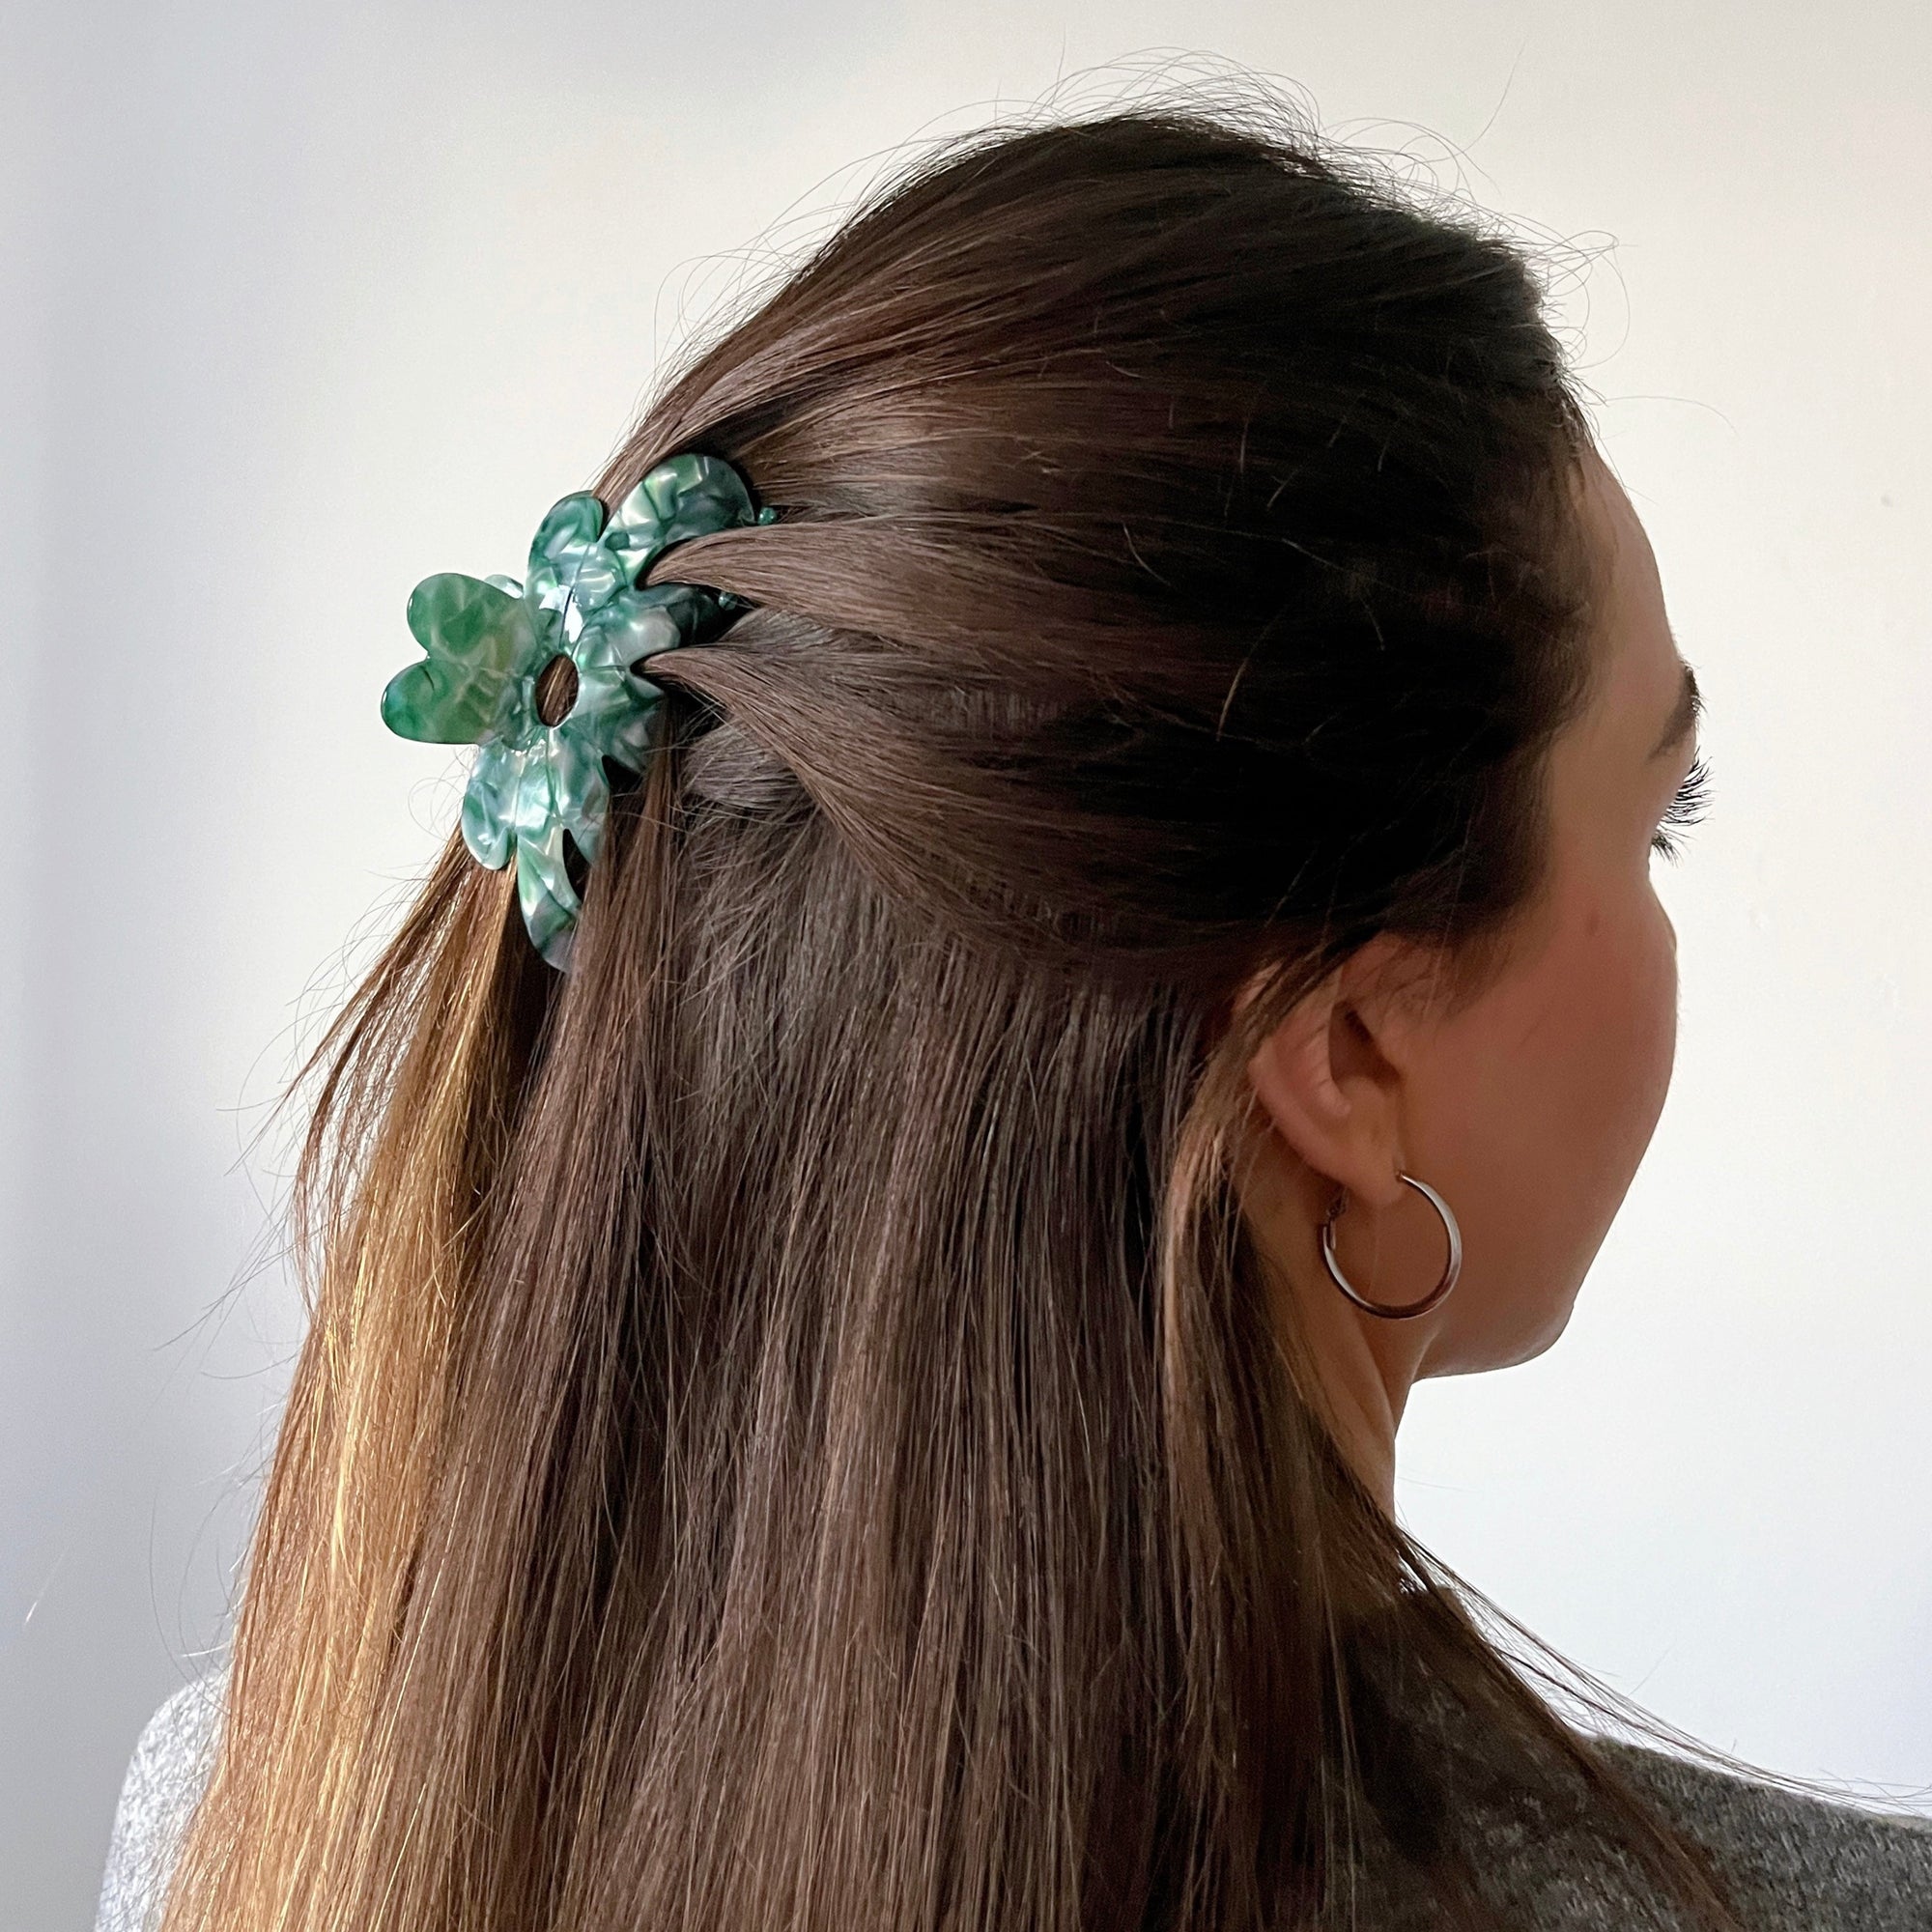 Meet AMMA!  A floral shaped medium size claw. The medium size makes it very easy to use. For medium thickness/length it can be used for an all up look and for finer and thick hair, it will probably be best styled securing a bun or a half up style.  Each clip comes in a branded Tort pouch (colours change seasonally).  Size: 9.5cm  Colour: marbled iridescent teal green  Material: eco-resin